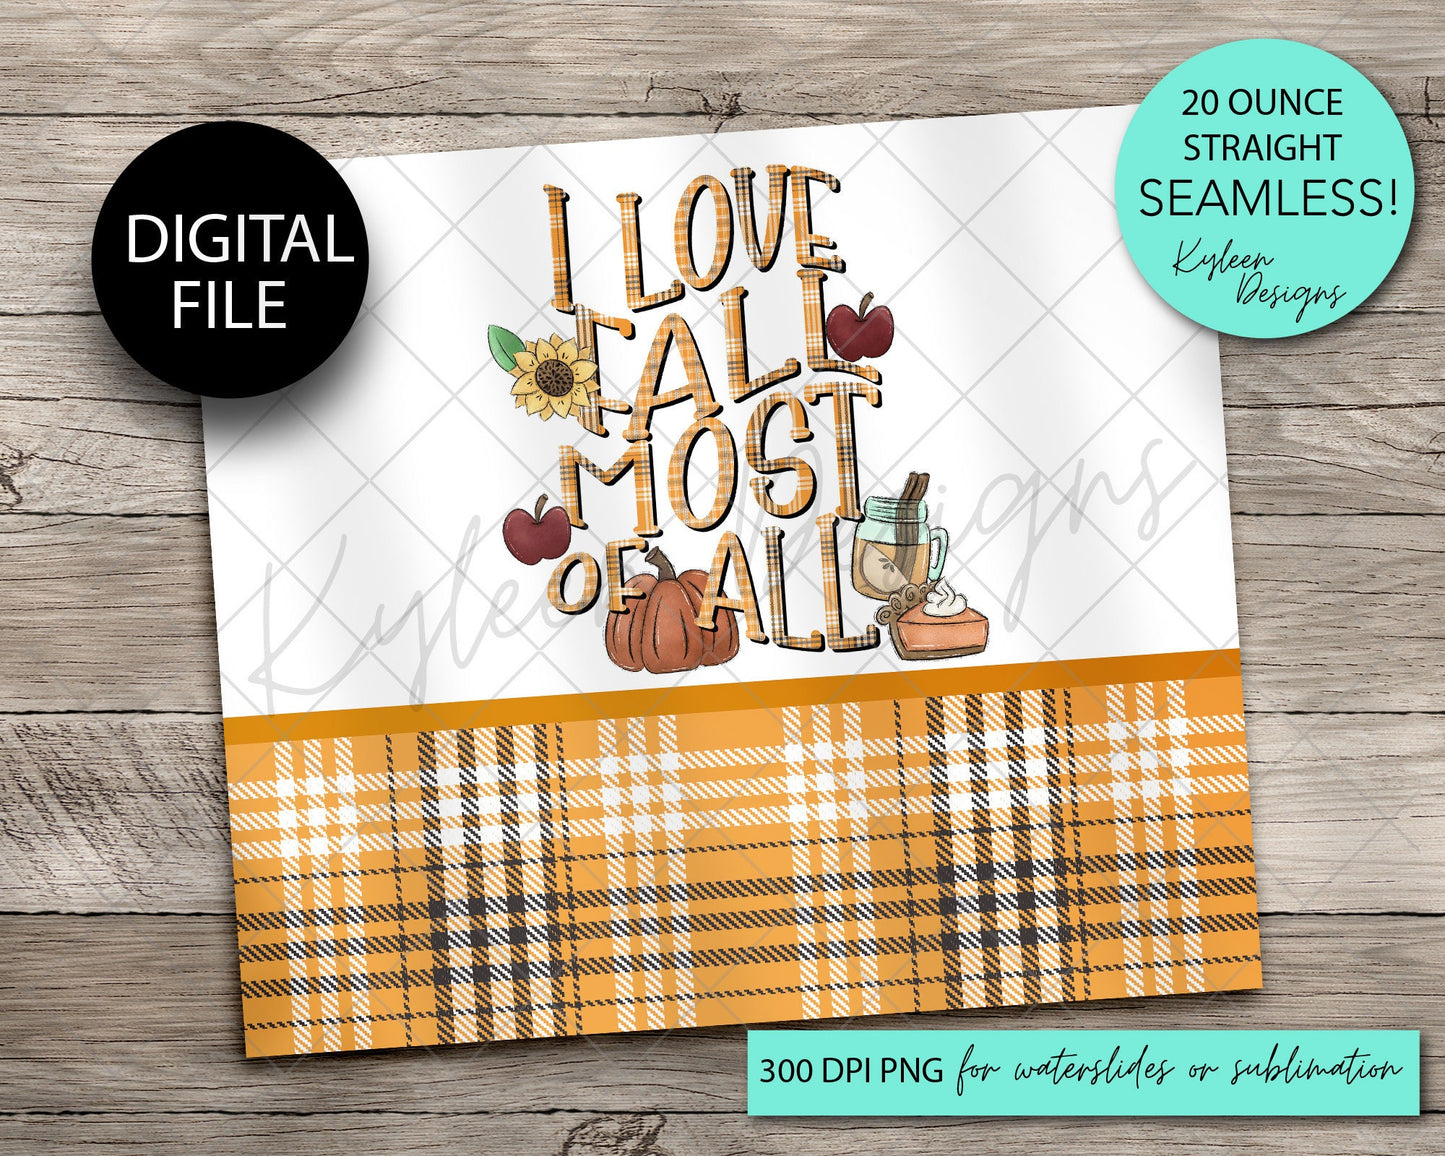 SEAMLESS love fall most of all 20 ounce tumbler wrap for sublimation, waterslide High res PNG digital file- Straight only